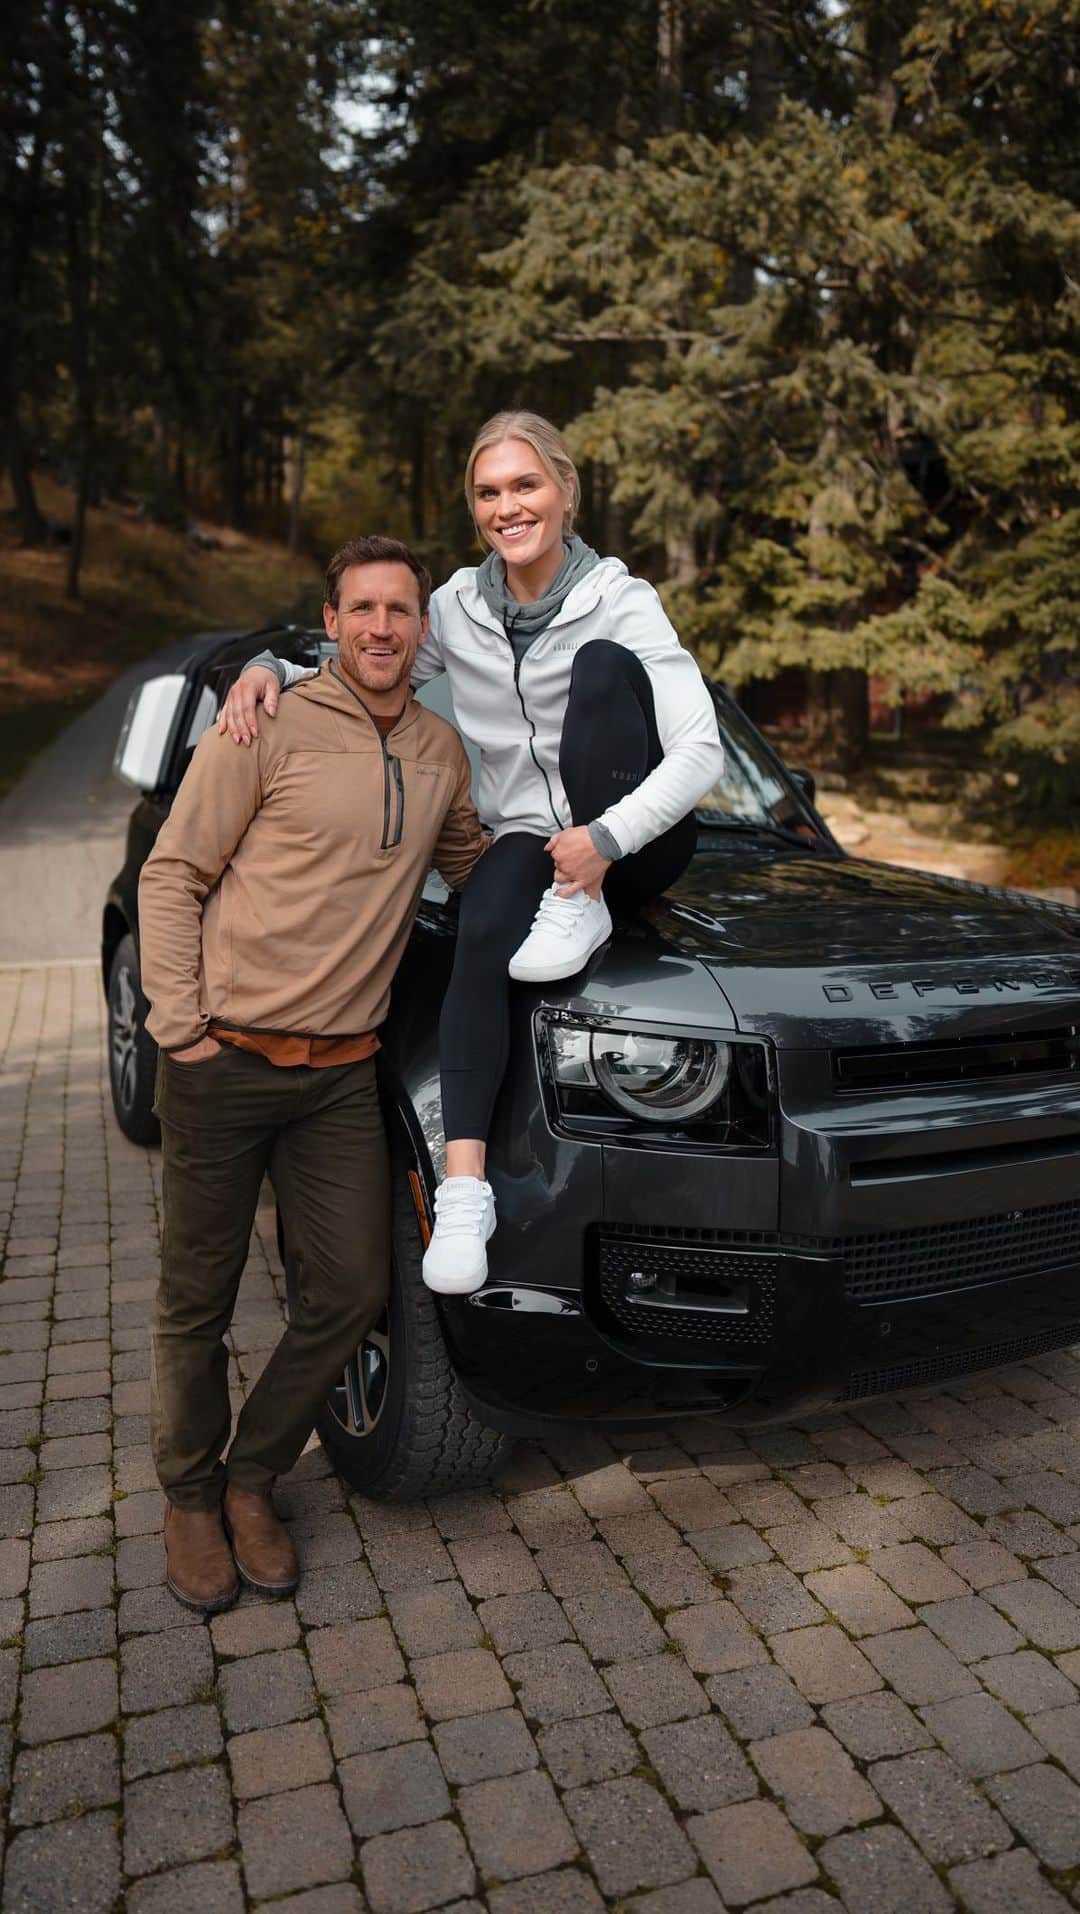 Katrin Tanja Davidsdottirのインスタグラム：「I’ve had my eye on a @landroverusa Defender for a few years now, and I think it’s time to officially join the family!  I brought home this new Defender for @katrintanja to test drive, and also surprised her with a trip to one of my favorite annual events, the #DestinationDefender weekend! Here’s the details:  𝗪𝗛𝗢: Defender enthusiasts and outdoor lovers 𝗪𝗛𝗔𝗧: “Destination Defender” 𝗪𝗛𝗘𝗥𝗘: Iron Horse Ranch in Somerville, TX 𝗪𝗛𝗘𝗡: November 10-12 / 2023 𝗪𝗛𝗬: To get together with adventure lovers and participate in some fun outdoor activities, physical challenges, drive some Defenders, and eat some great food!  @katrintanja and I will be there for the entire weekend, and would love to have you join us as well! Click the link in our bios to find more details and grab your ticket today!  See you at Iron Horse Ranch!   #DestinationDefender」